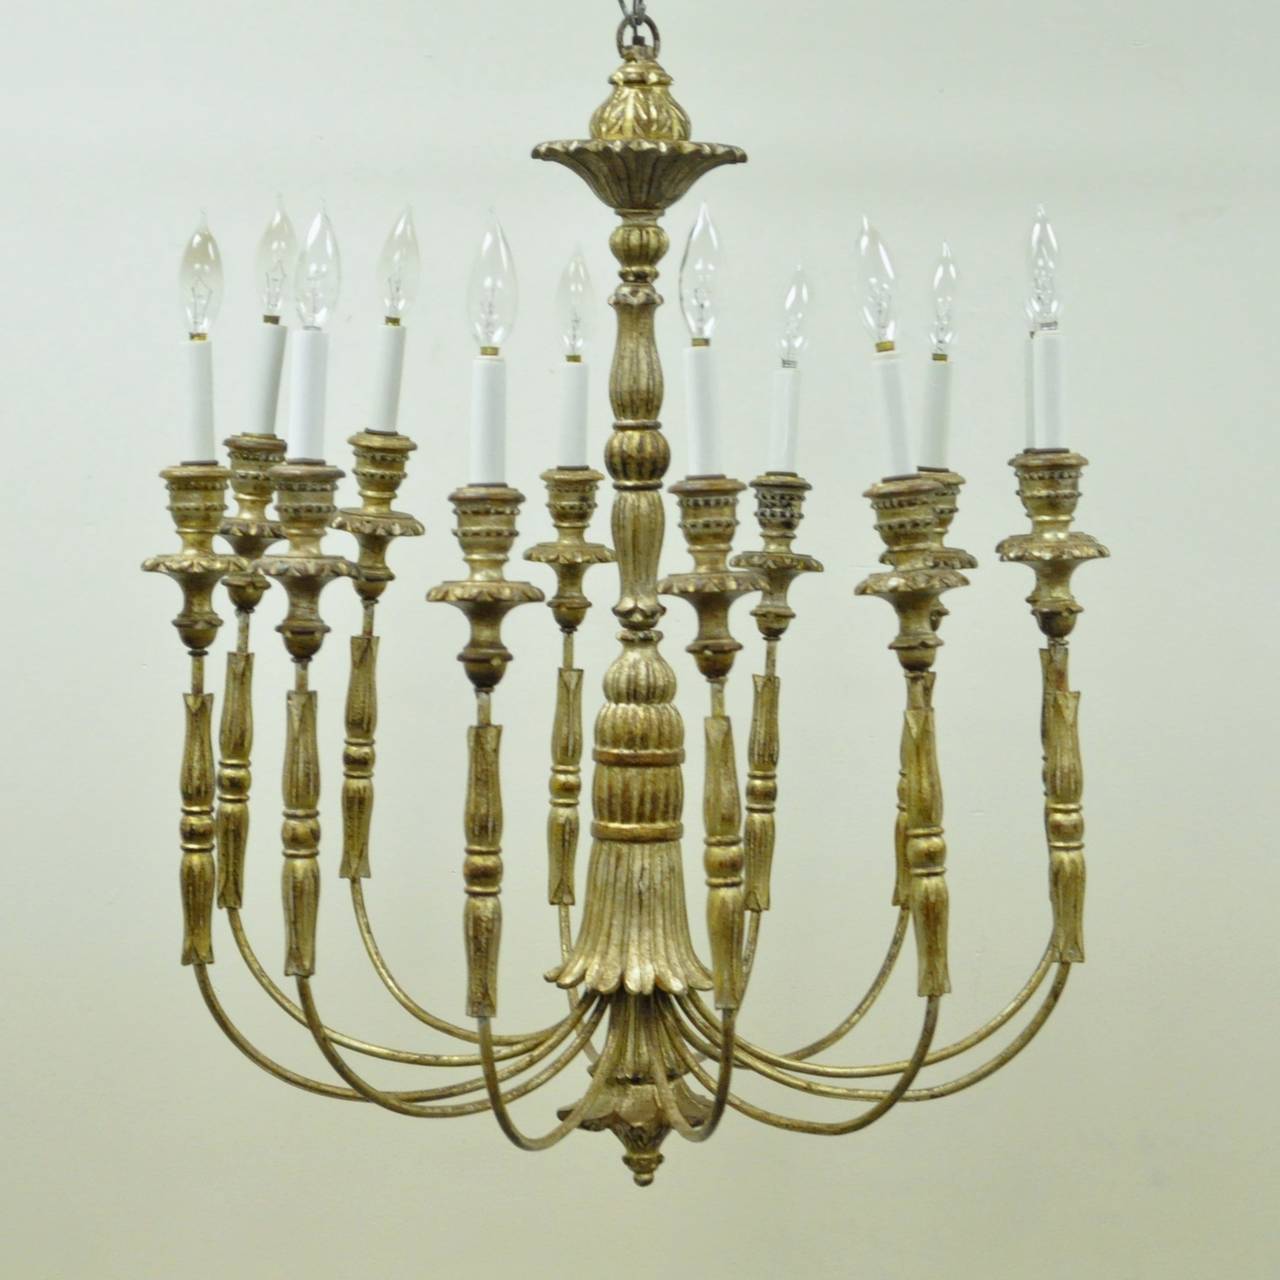 Beautiful Vintage Italian Gilt Carved Wood & Iron Chandelier in the Neoclassical taste. This stunning 12 arm chandelier features a carved and decorated center shaft, with equally impressive, carved wood bobeches and arm detailing. The fixture is